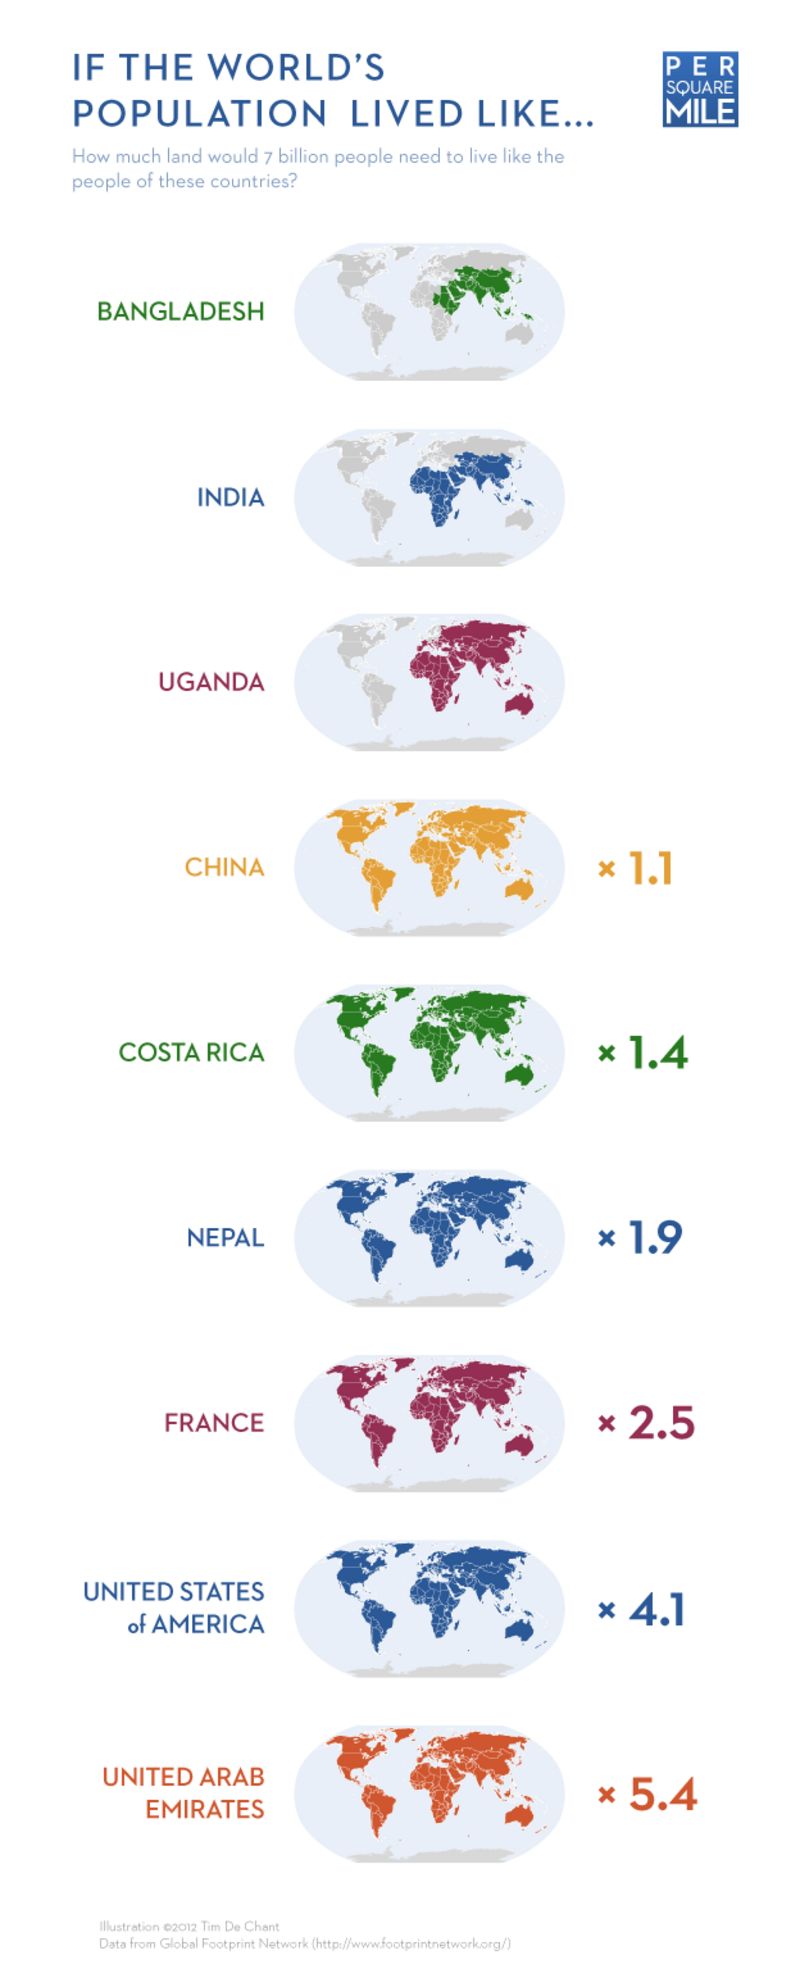 https://ichef.bbci.co.uk/news/800/media/images/83647000/png/_83647604_ecological-footprint-by-country.png